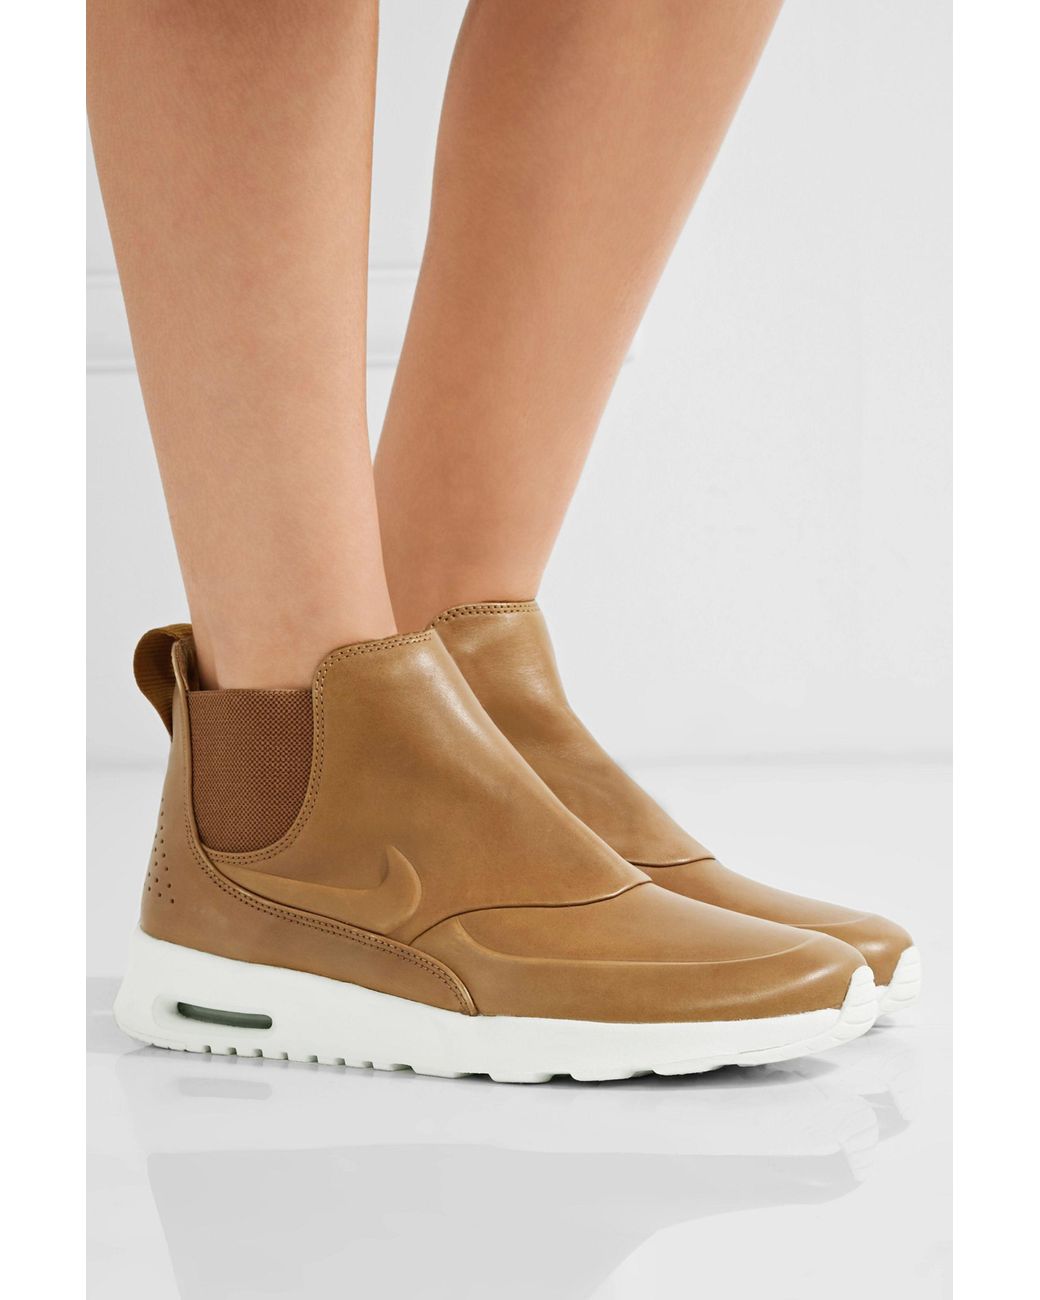 Nike Air Max Thea Mid Wmns in Brown | Lyst Canada